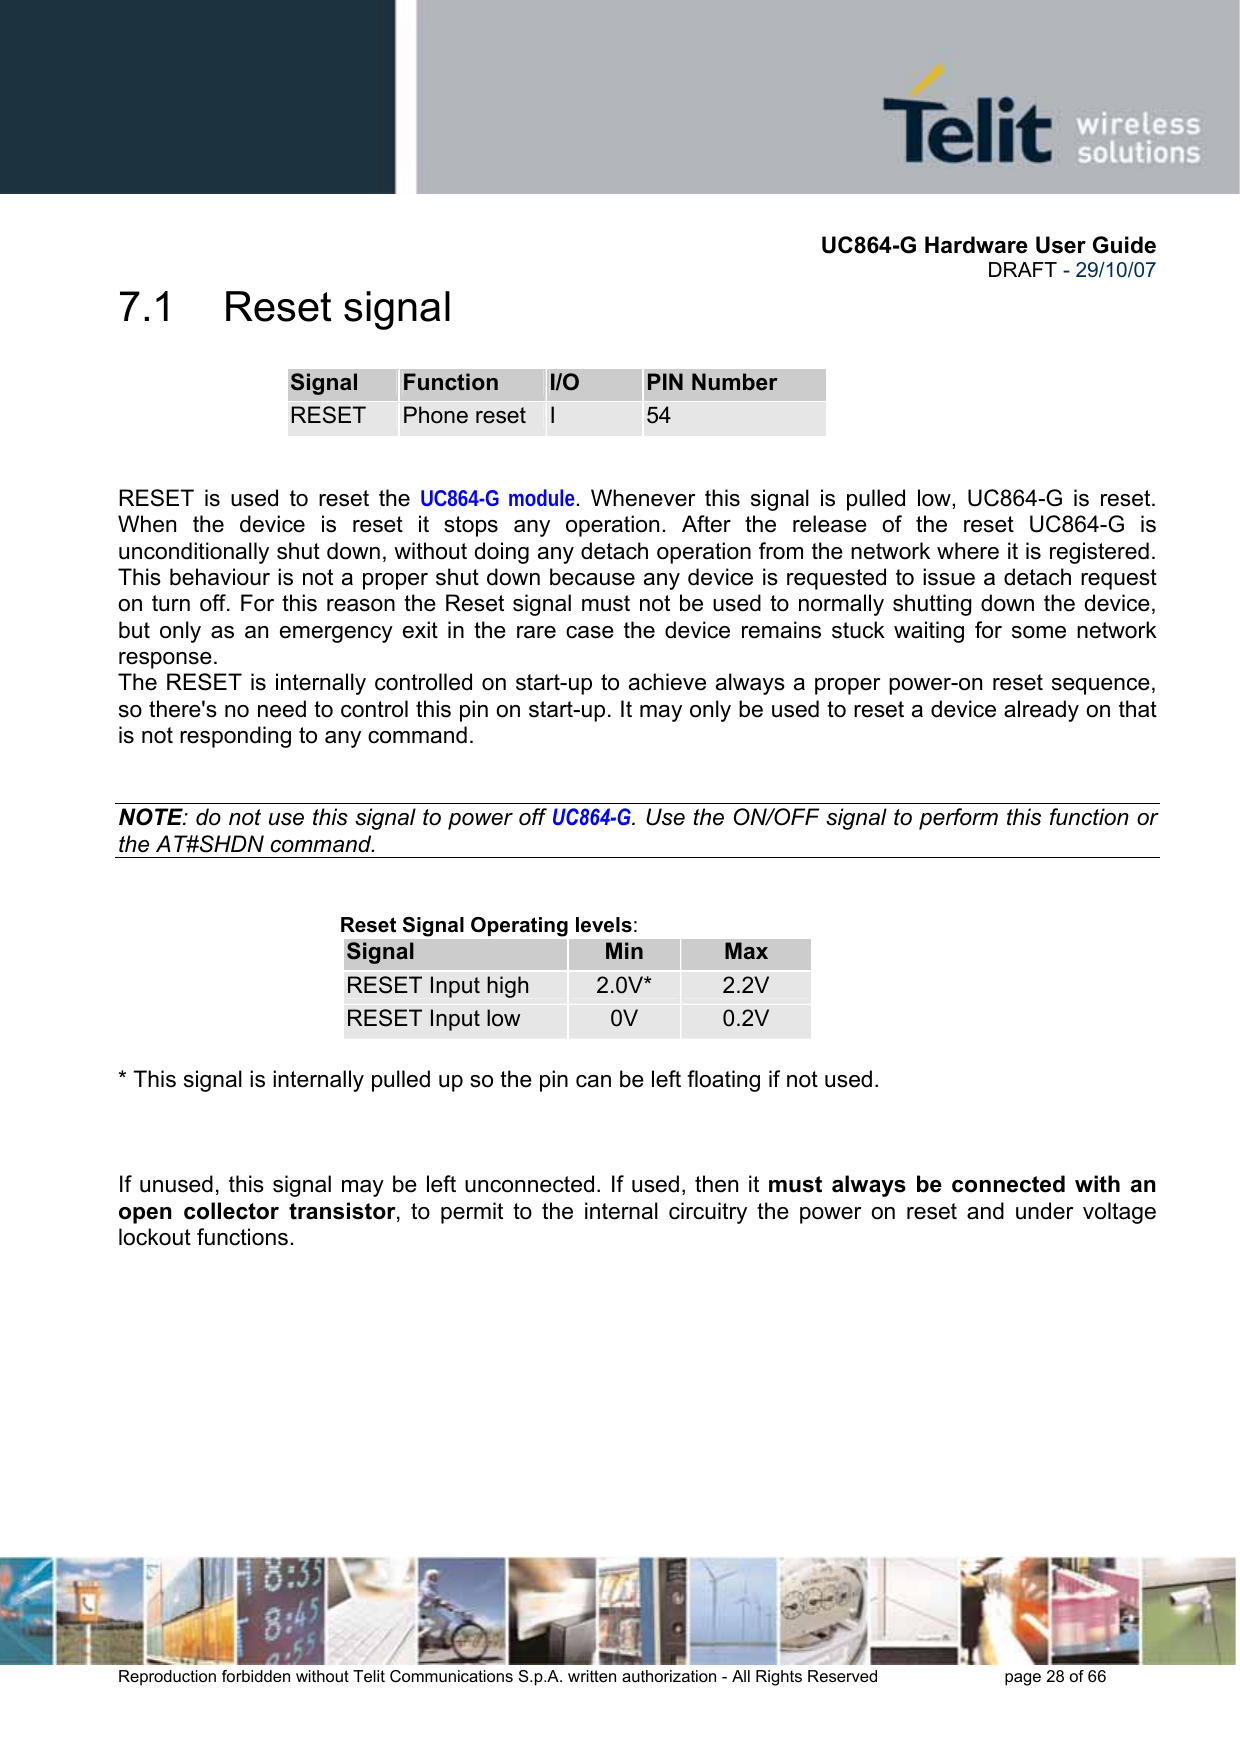       UC864-G Hardware User Guide  DRAFT - 29/10/07      Reproduction forbidden without Telit Communications S.p.A. written authorization - All Rights Reserved    page 28 of 66  7.1 Reset signal Signal  Function  I/O  PIN Number RESET  Phone reset  I  54   RESET is used to reset the UC864-G module. Whenever this signal is pulled low, UC864-G is reset. When the device is reset it stops any operation. After the release of the reset UC864-G is unconditionally shut down, without doing any detach operation from the network where it is registered. This behaviour is not a proper shut down because any device is requested to issue a detach request on turn off. For this reason the Reset signal must not be used to normally shutting down the device, but only as an emergency exit in the rare case the device remains stuck waiting for some network response. The RESET is internally controlled on start-up to achieve always a proper power-on reset sequence, so there&apos;s no need to control this pin on start-up. It may only be used to reset a device already on that is not responding to any command.   NOTE: do not use this signal to power off UC864-G. Use the ON/OFF signal to perform this function or the AT#SHDN command.   Reset Signal Operating levels: Signal  Min  Max RESET Input high  2.0V*  2.2V RESET Input low  0V  0.2V  * This signal is internally pulled up so the pin can be left floating if not used.    If unused, this signal may be left unconnected. If used, then it must always be connected with an open collector transistor, to permit to the internal circuitry the power on reset and under voltage lockout functions.    